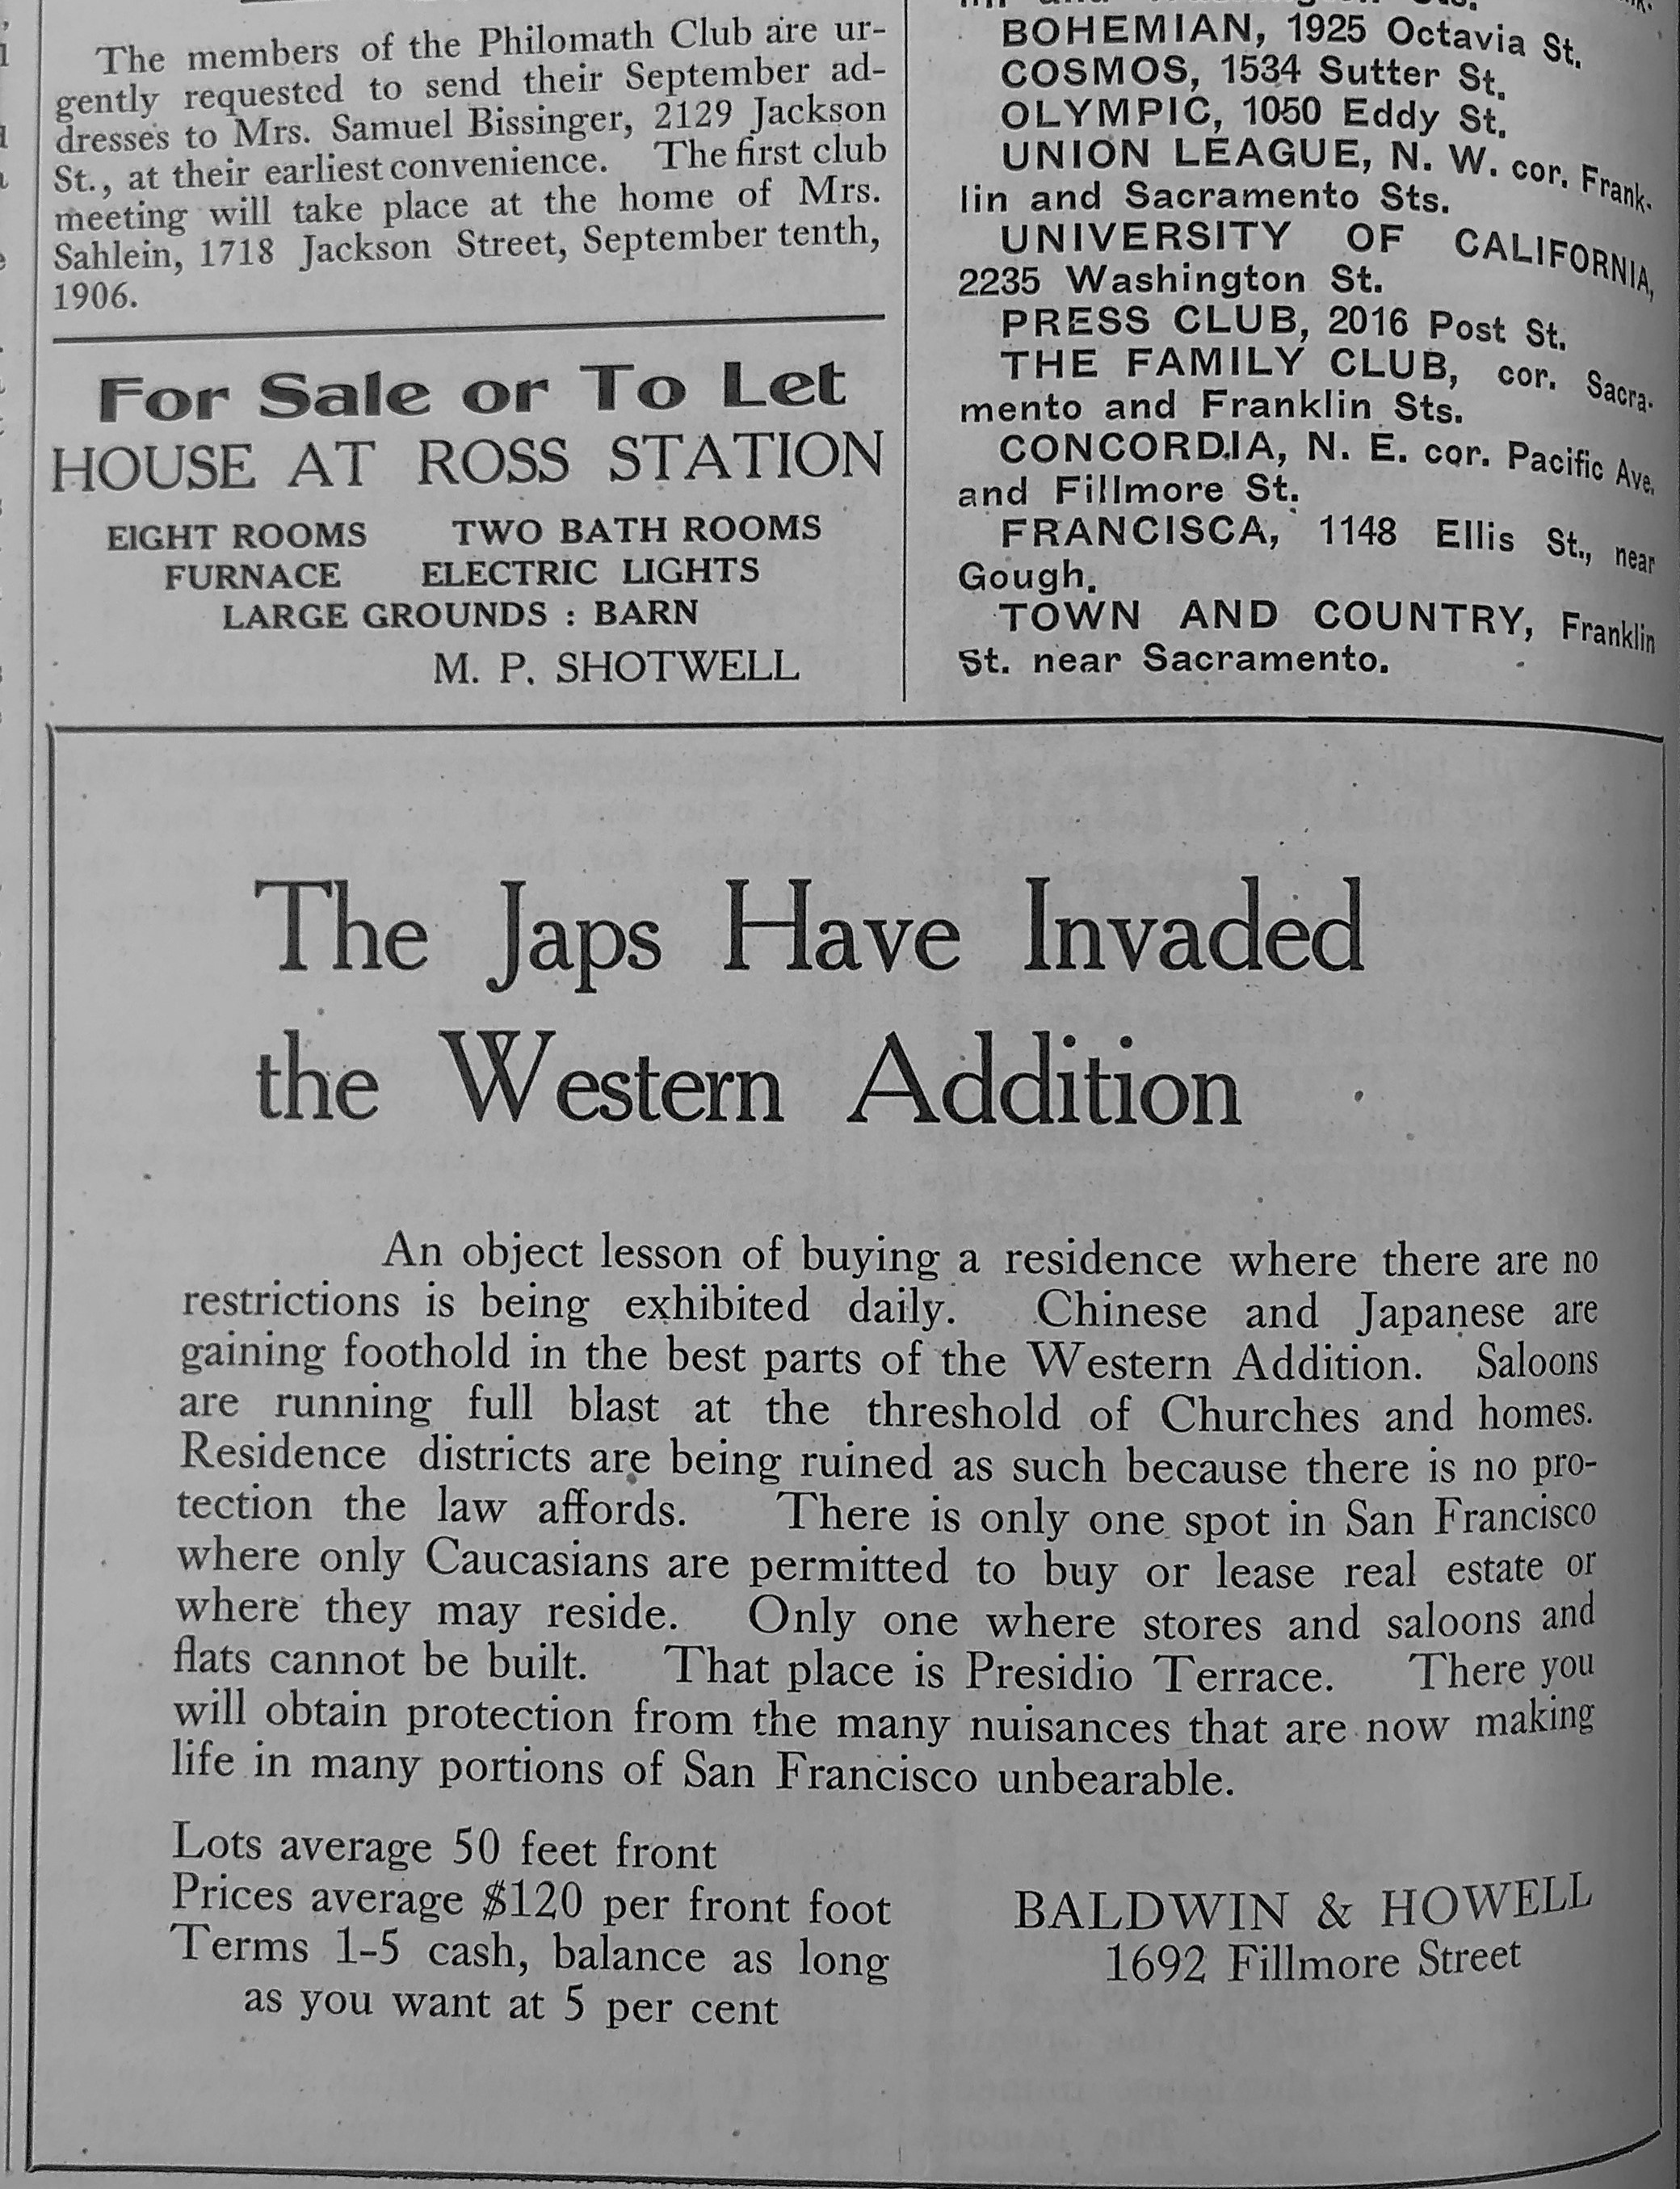 This photo is of Newspaper ads promoting racial covenants and racially exclusionary housing in Oakland and San Francisco. Left: A Laymance Real Estate Company advertisement for Rock Ridge Park in Oakland advertises that “no negroes, no Chinese, no Japanese” can build or lease in Rock Ridge Park. Published in San Francisco Call, October 13, 1906, Courtesy of California Digital Newspaper Collection, Center for Bibliographic Studies and Research, University of California, Riverside. Right: The Baldwin & Howell Real Estate Company markets Presidio Terrace as the “only one spot in San Francisco where only Caucasians are permitted to buy or lease real estate or where they may reside.” Published in The Argonaut, September 1, 1906. Courtesy of The Bancroft Library, University of California